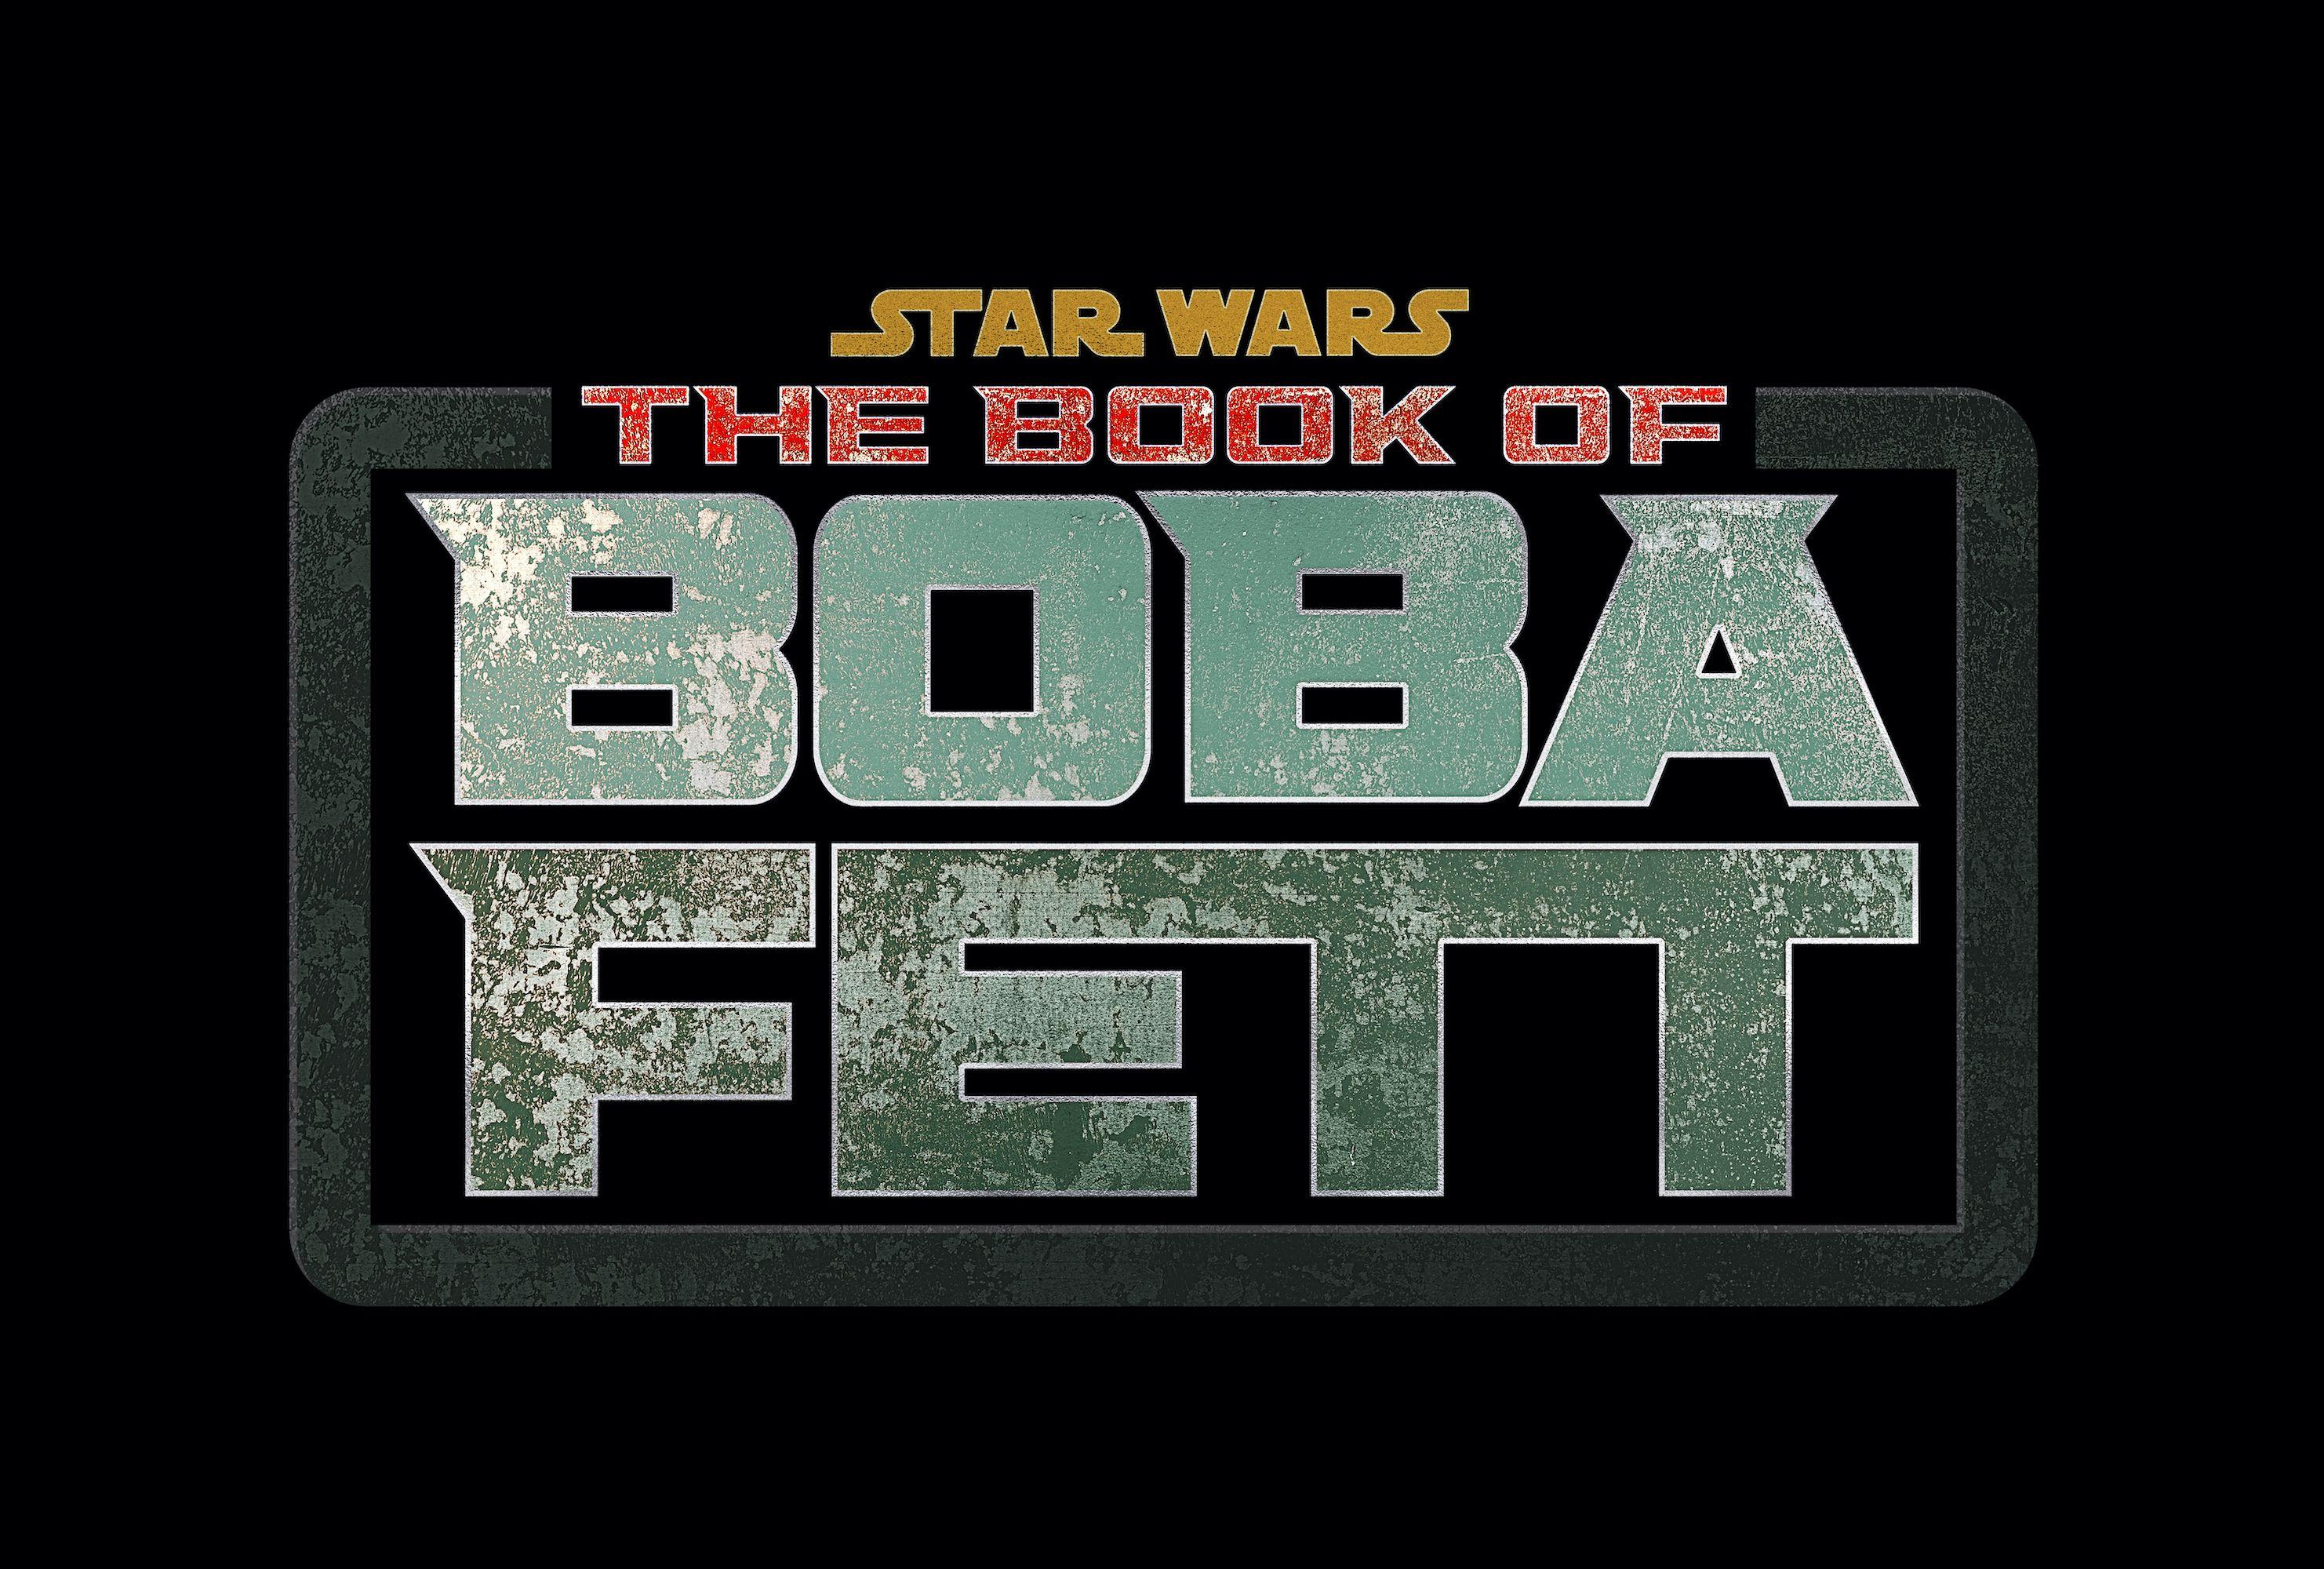 Official title card for 'The Book of Boba Fett'